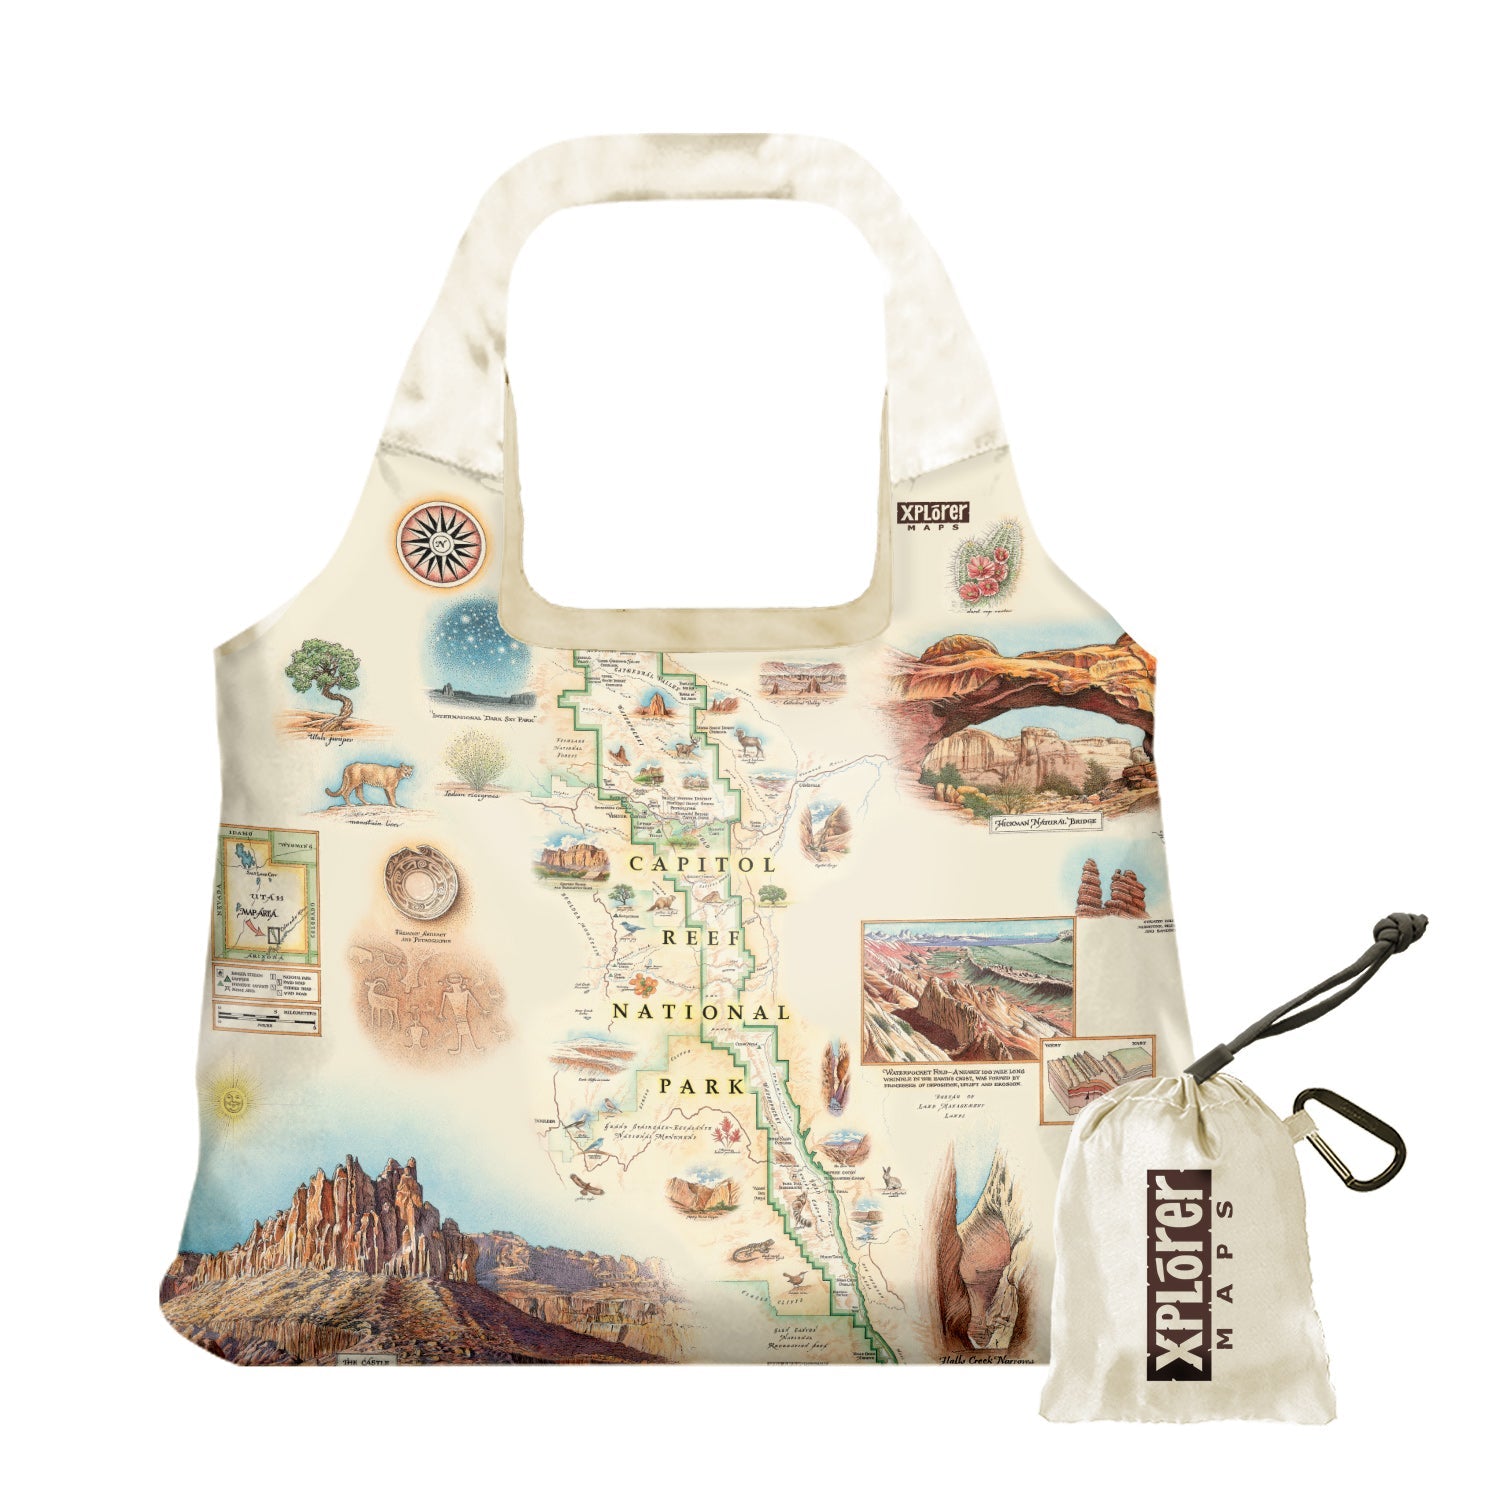 Utah's Capitol Reef National Park Map Pouch Tote Bag in earth tones. Featuring Claret Cup Cactus, Narrowleaf Yucca, Prince's Plume, and the Two-Needle Pinyon Pine. Detailed depictions of landmarks and geographic wonders like the Lower Muley Twist Canyon, Capitol Gorge, and Hickman Natural Bridge. 